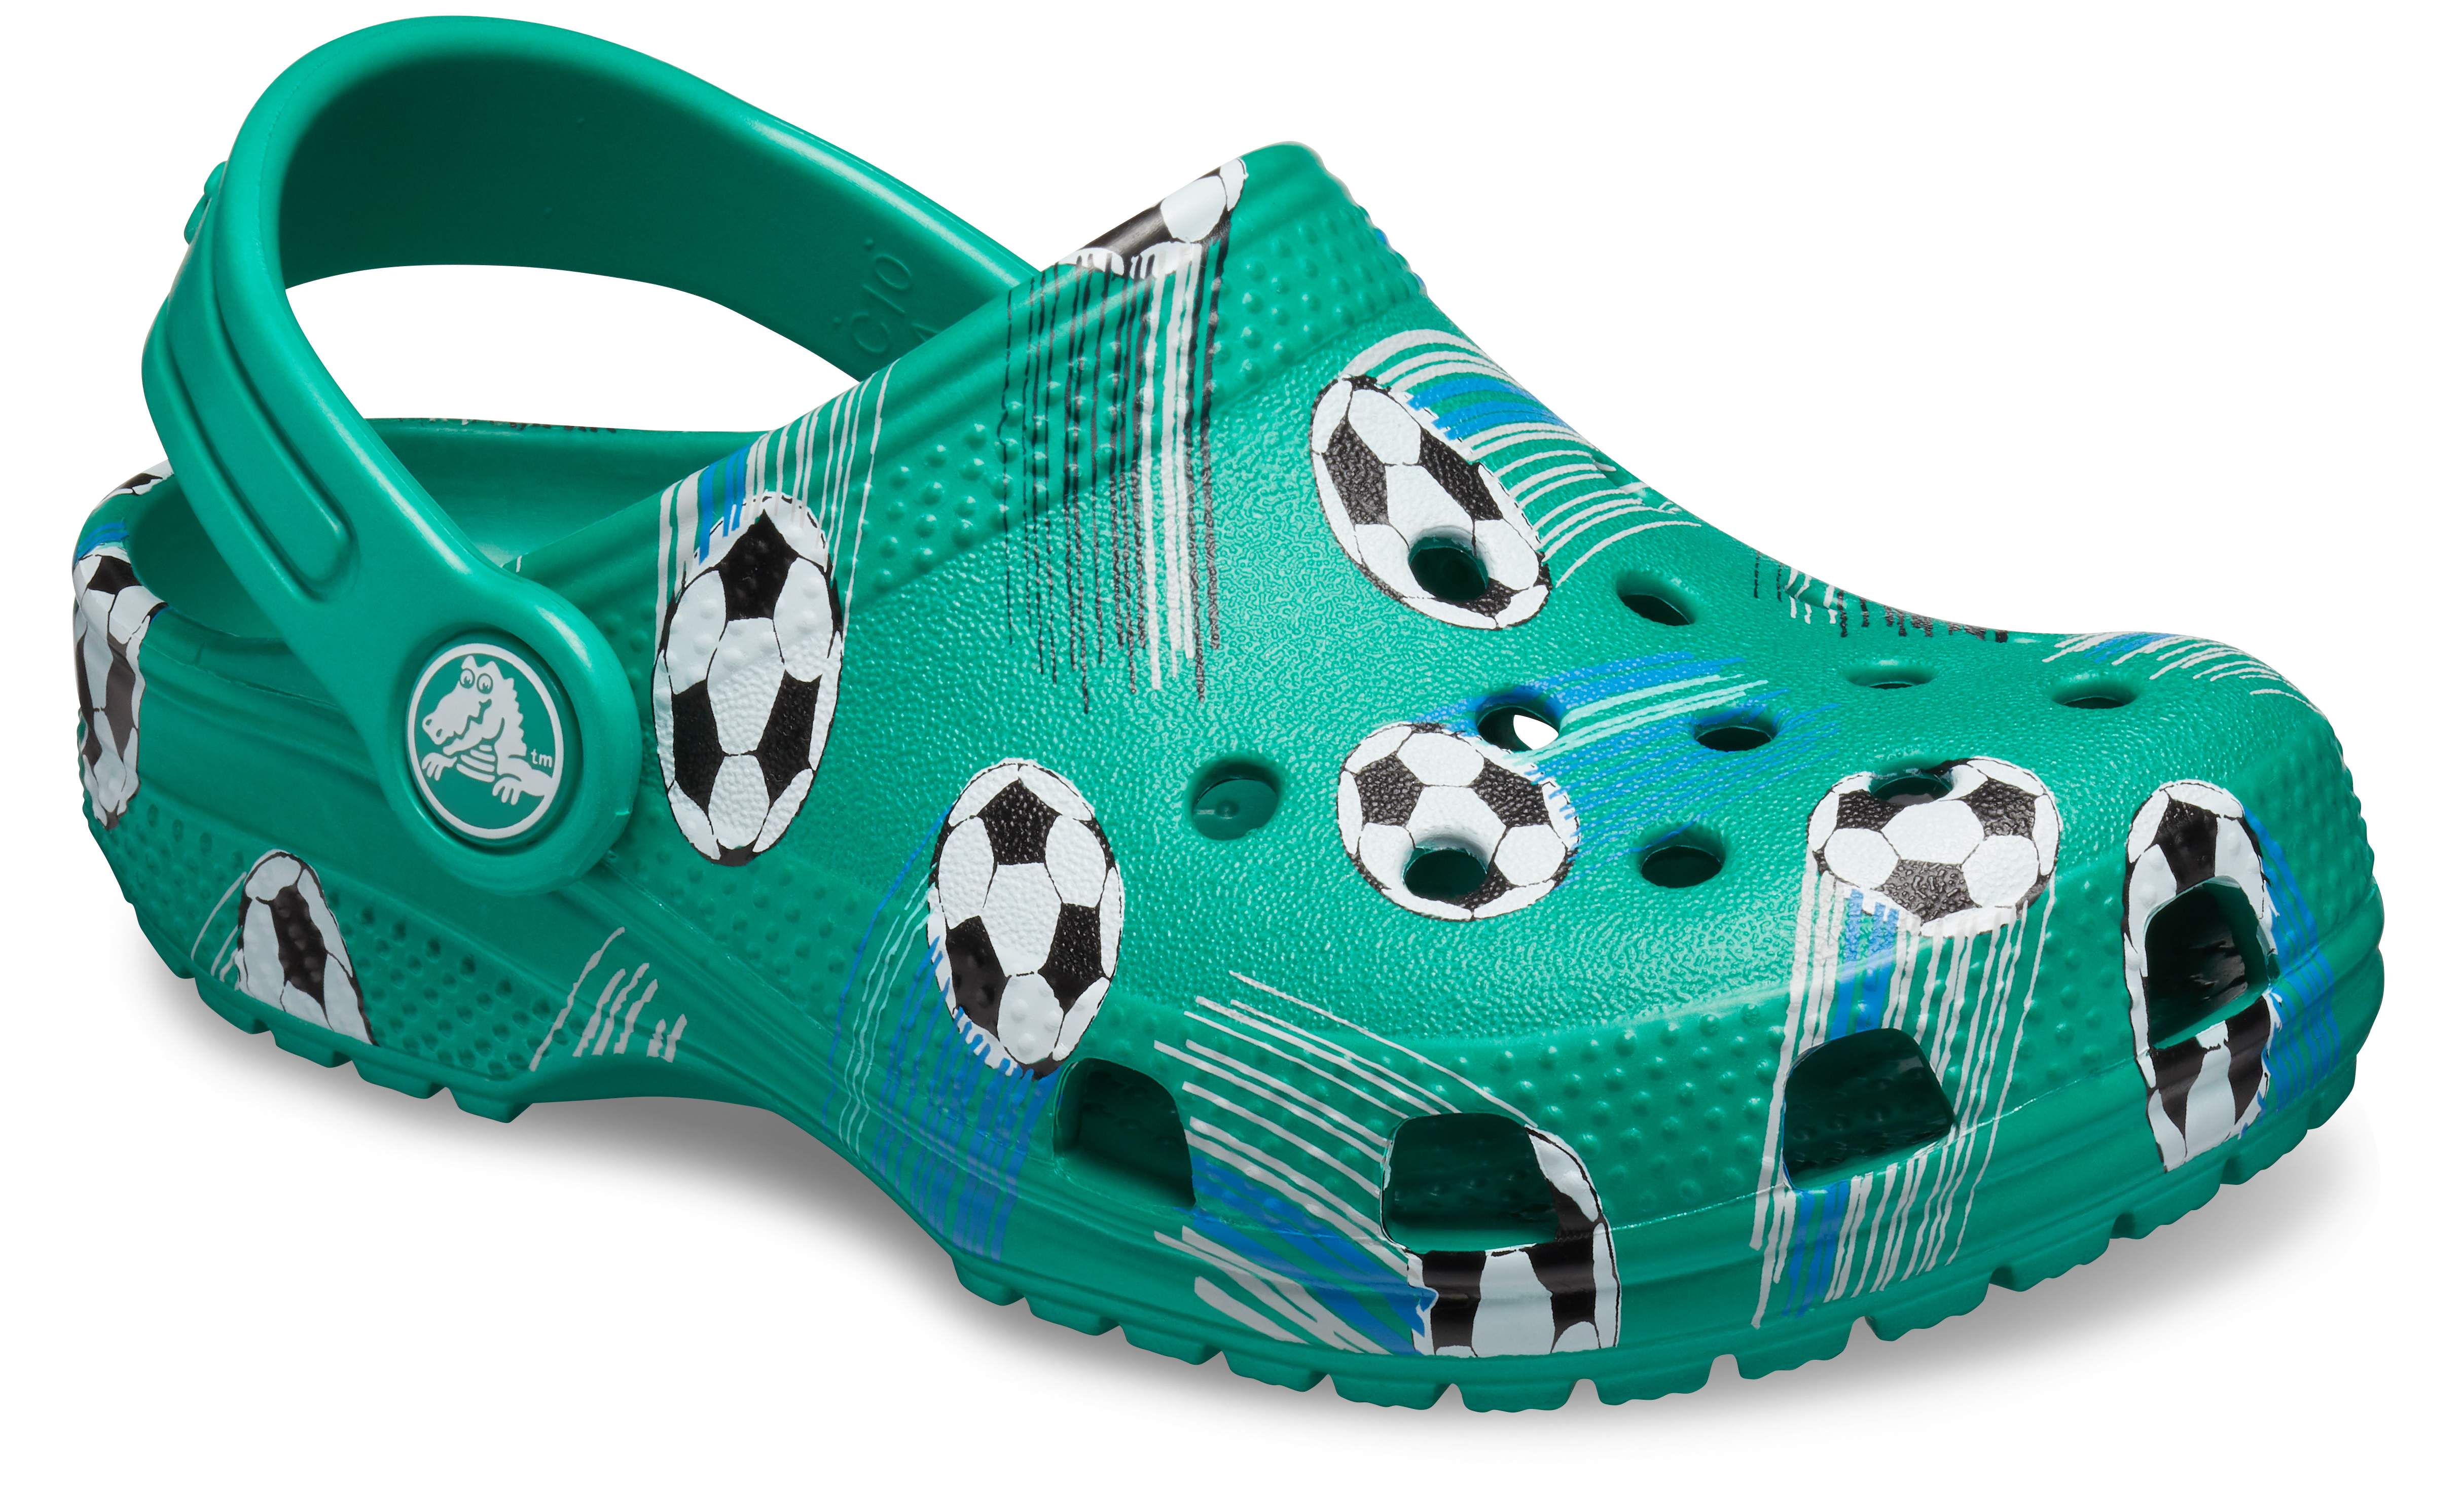 crocs like shoes for toddlers